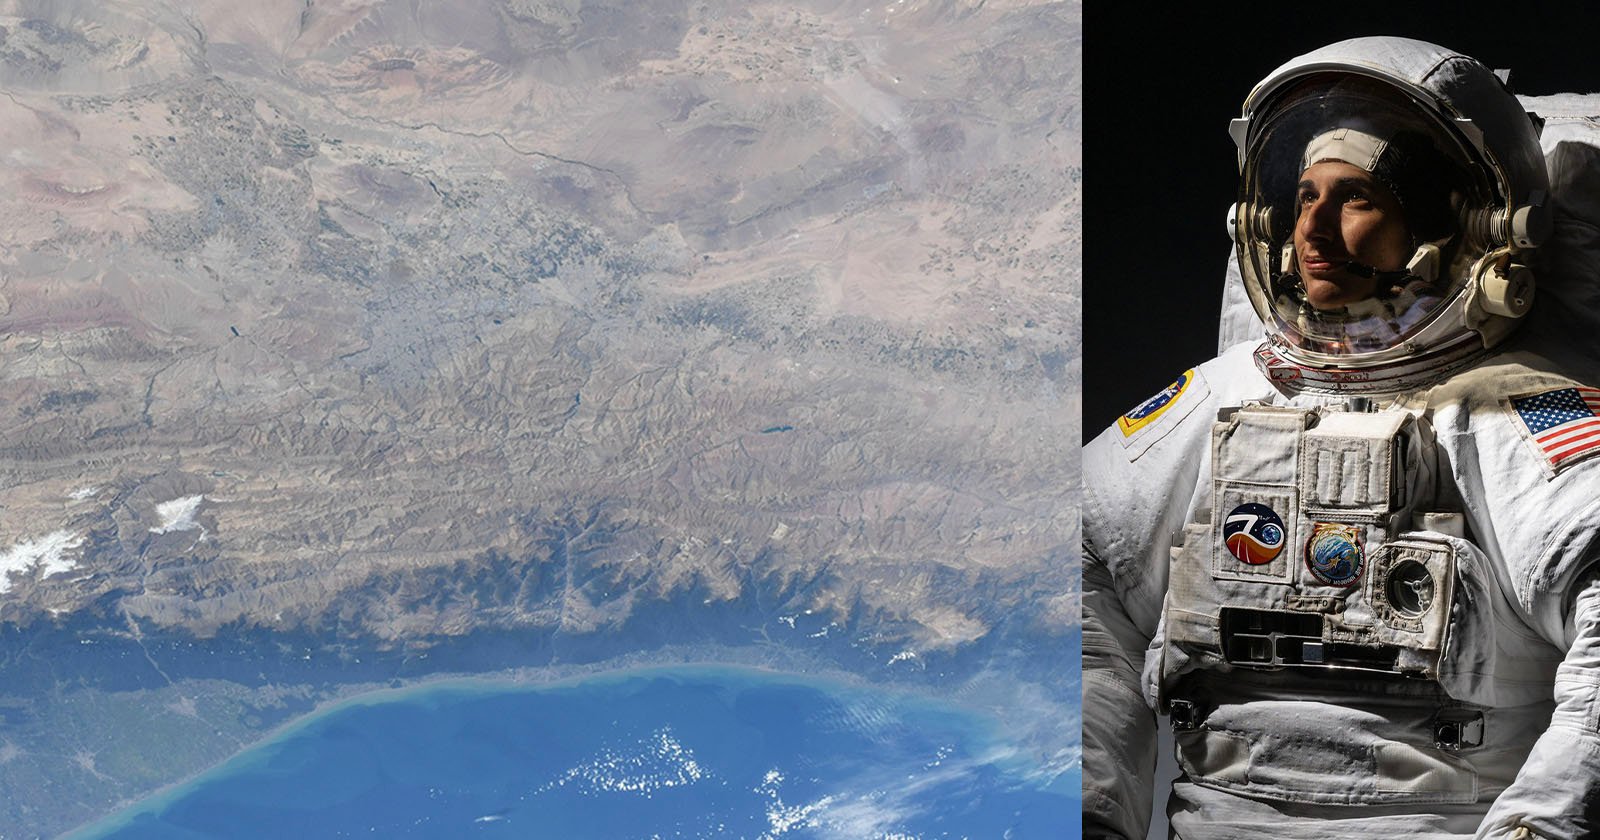  astronaut persian roots takes photos iran from 